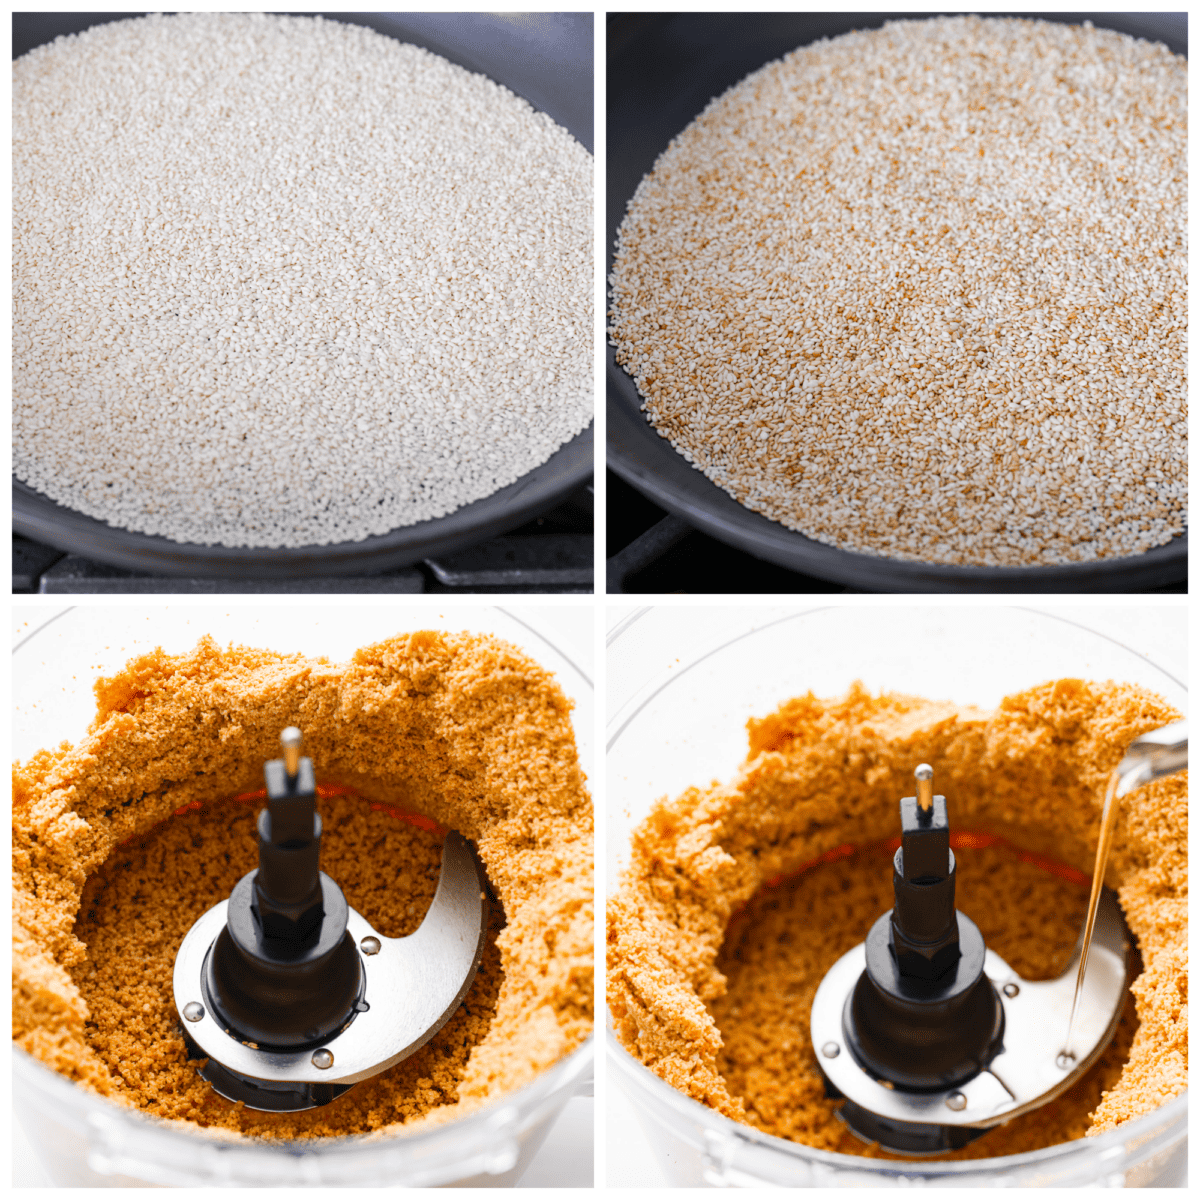 First process shot of sesame seeds in a skillet. Second process shot of toasted sesame seeds in a skillet. Third process photo of sesame seeds ground in a food processor. Fourth process shot of oil being added to the food processor.